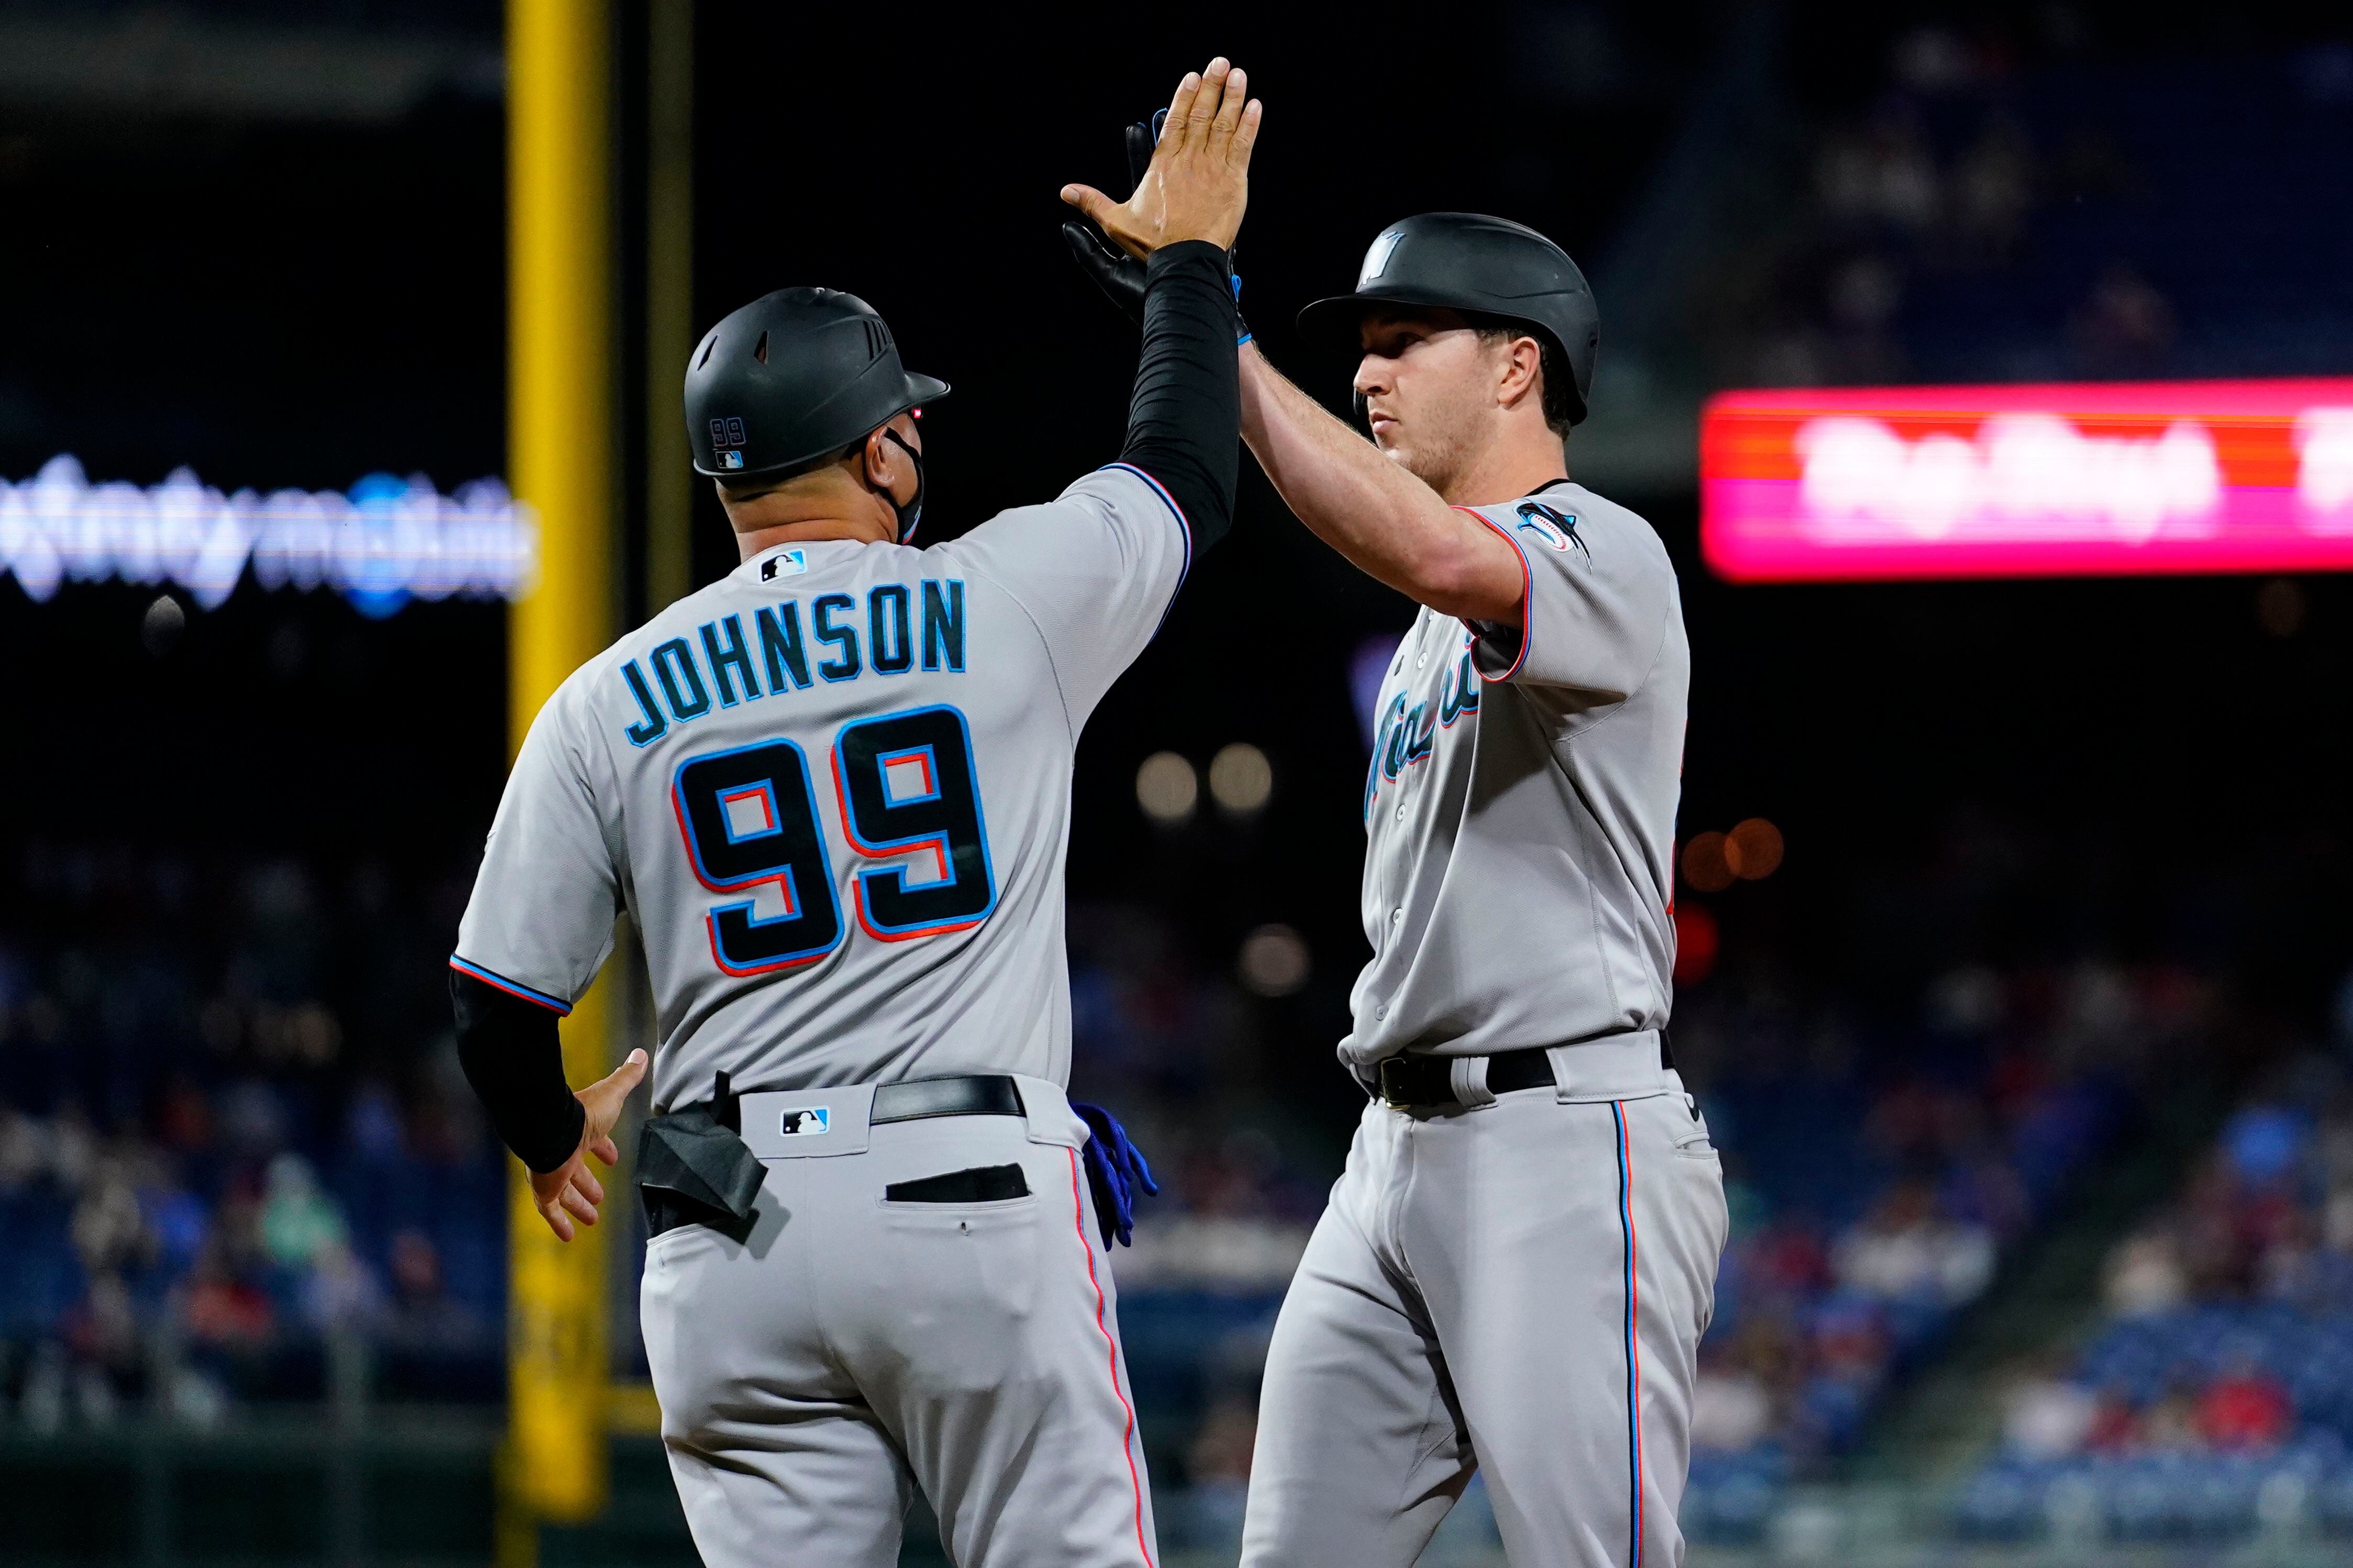 Miami Marlins: The 10 Best Rookie Seasons in Franchise History